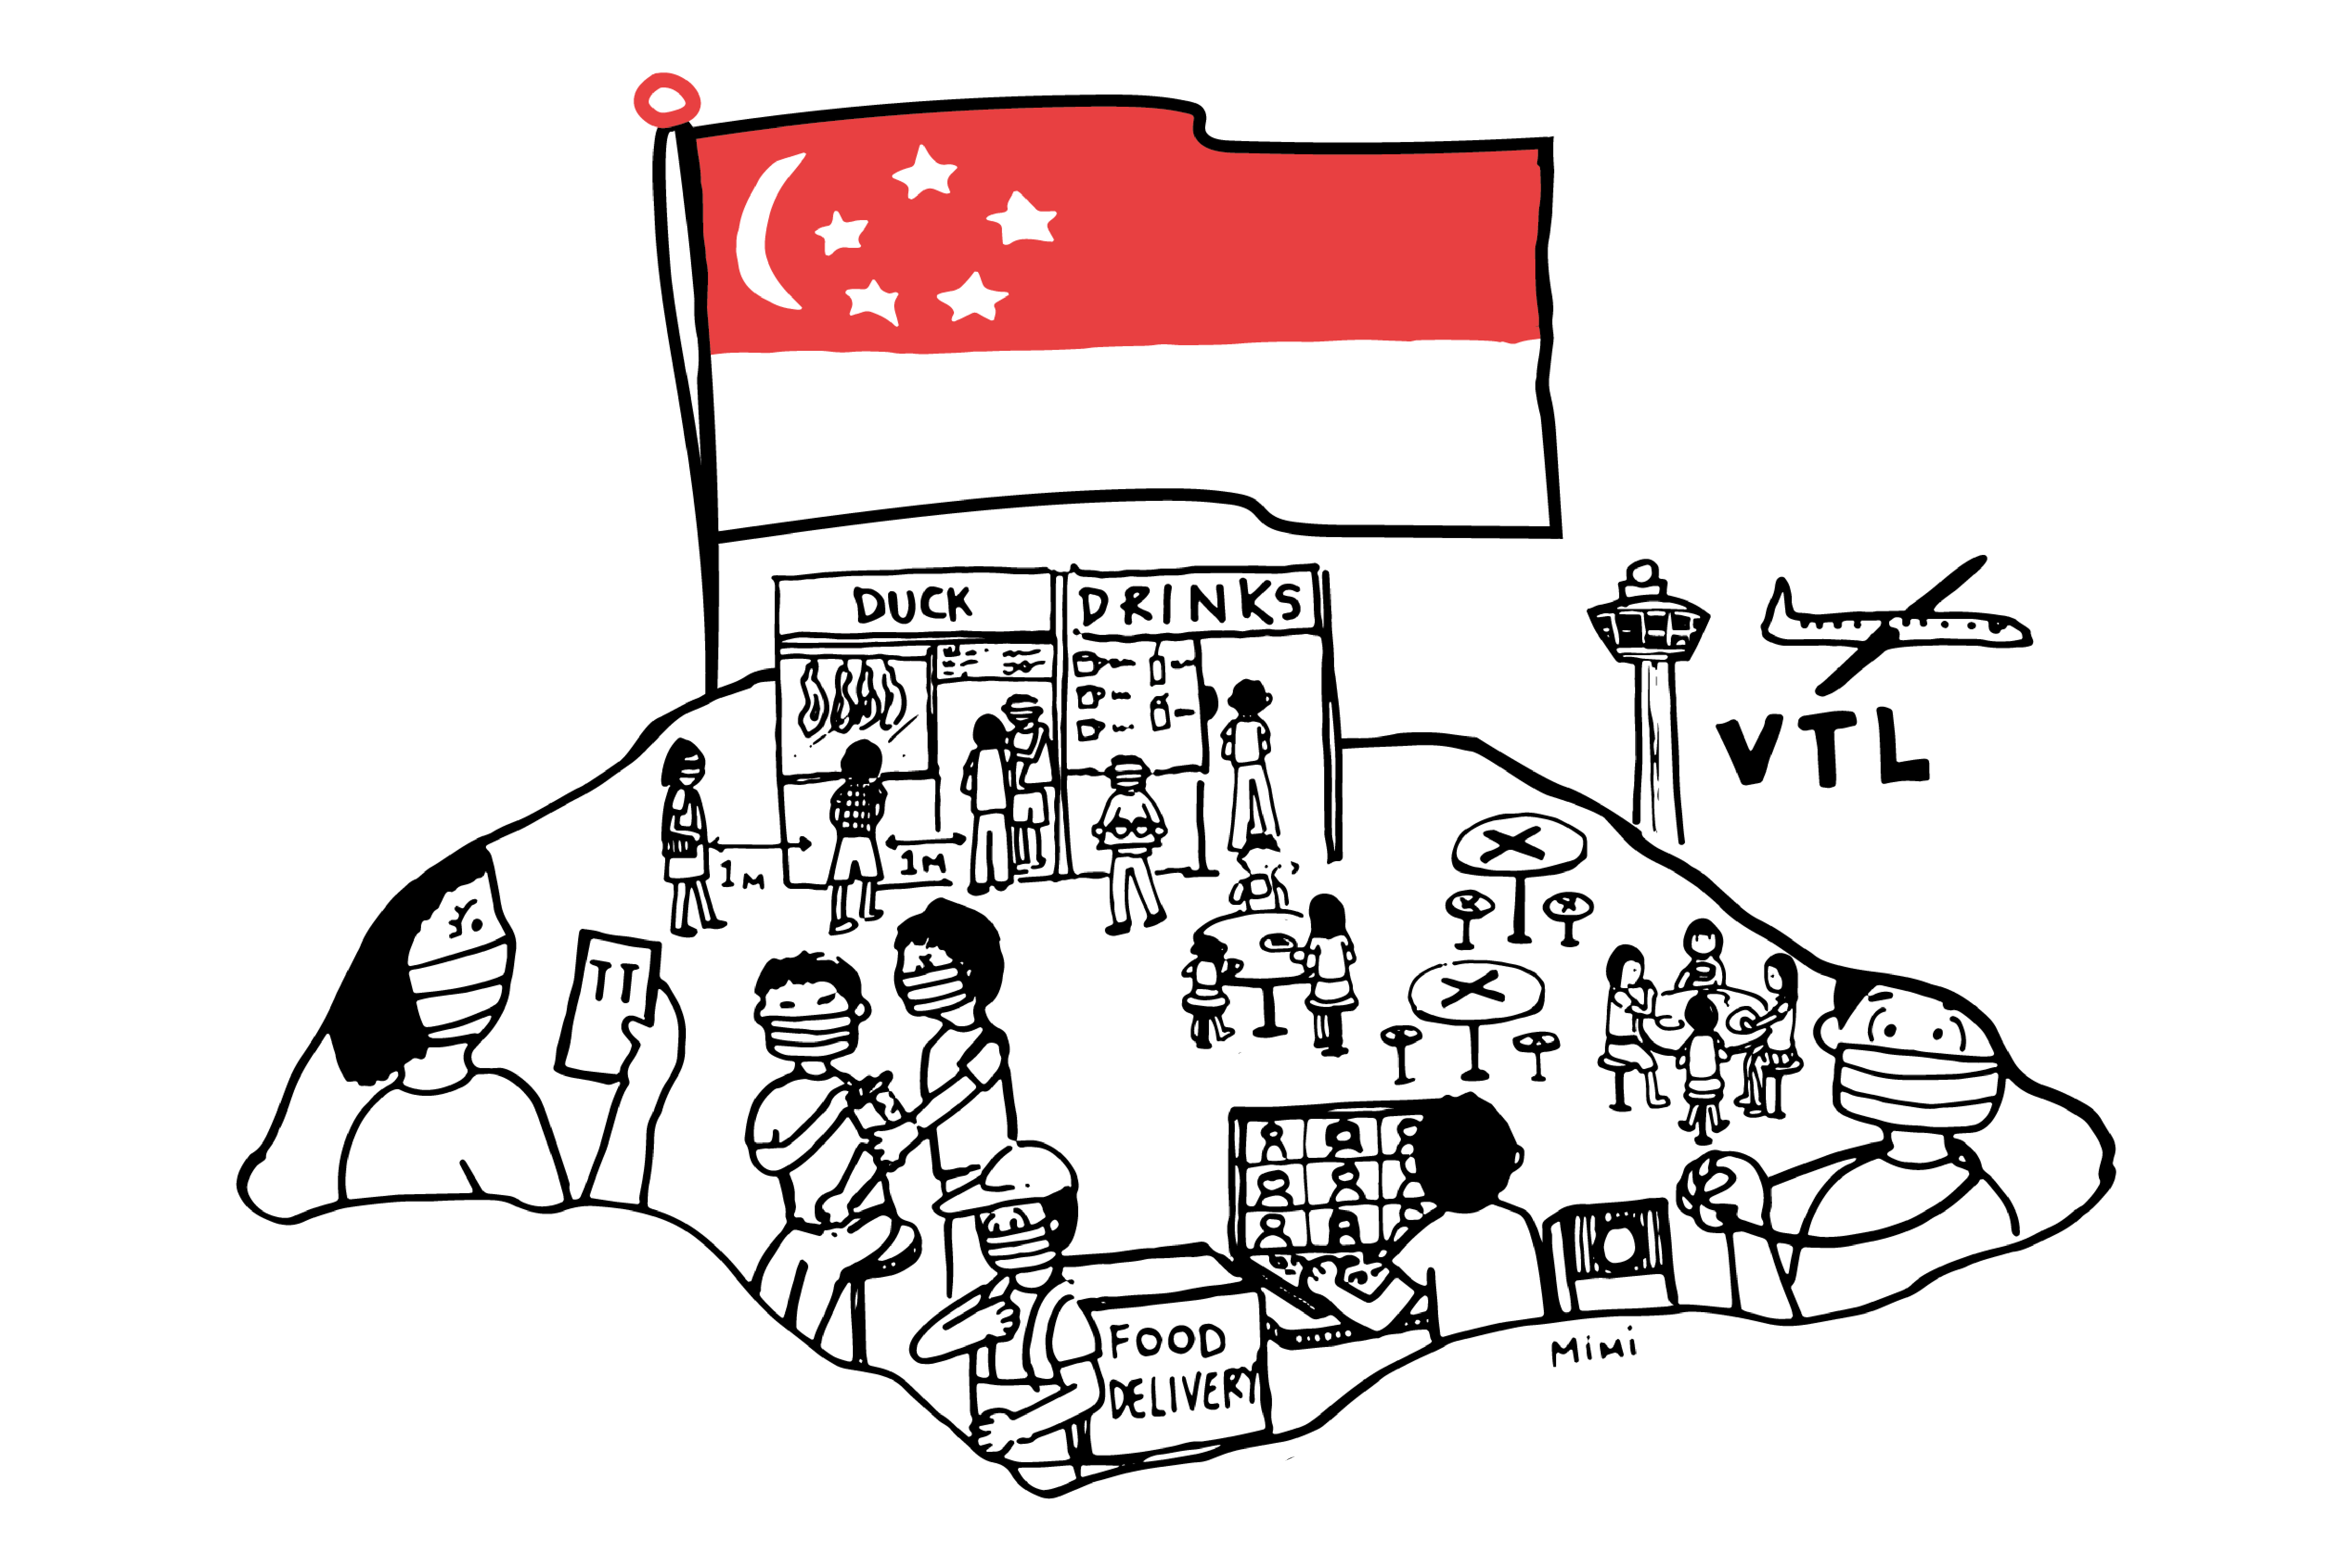 Image of an artwork for NDP 2022